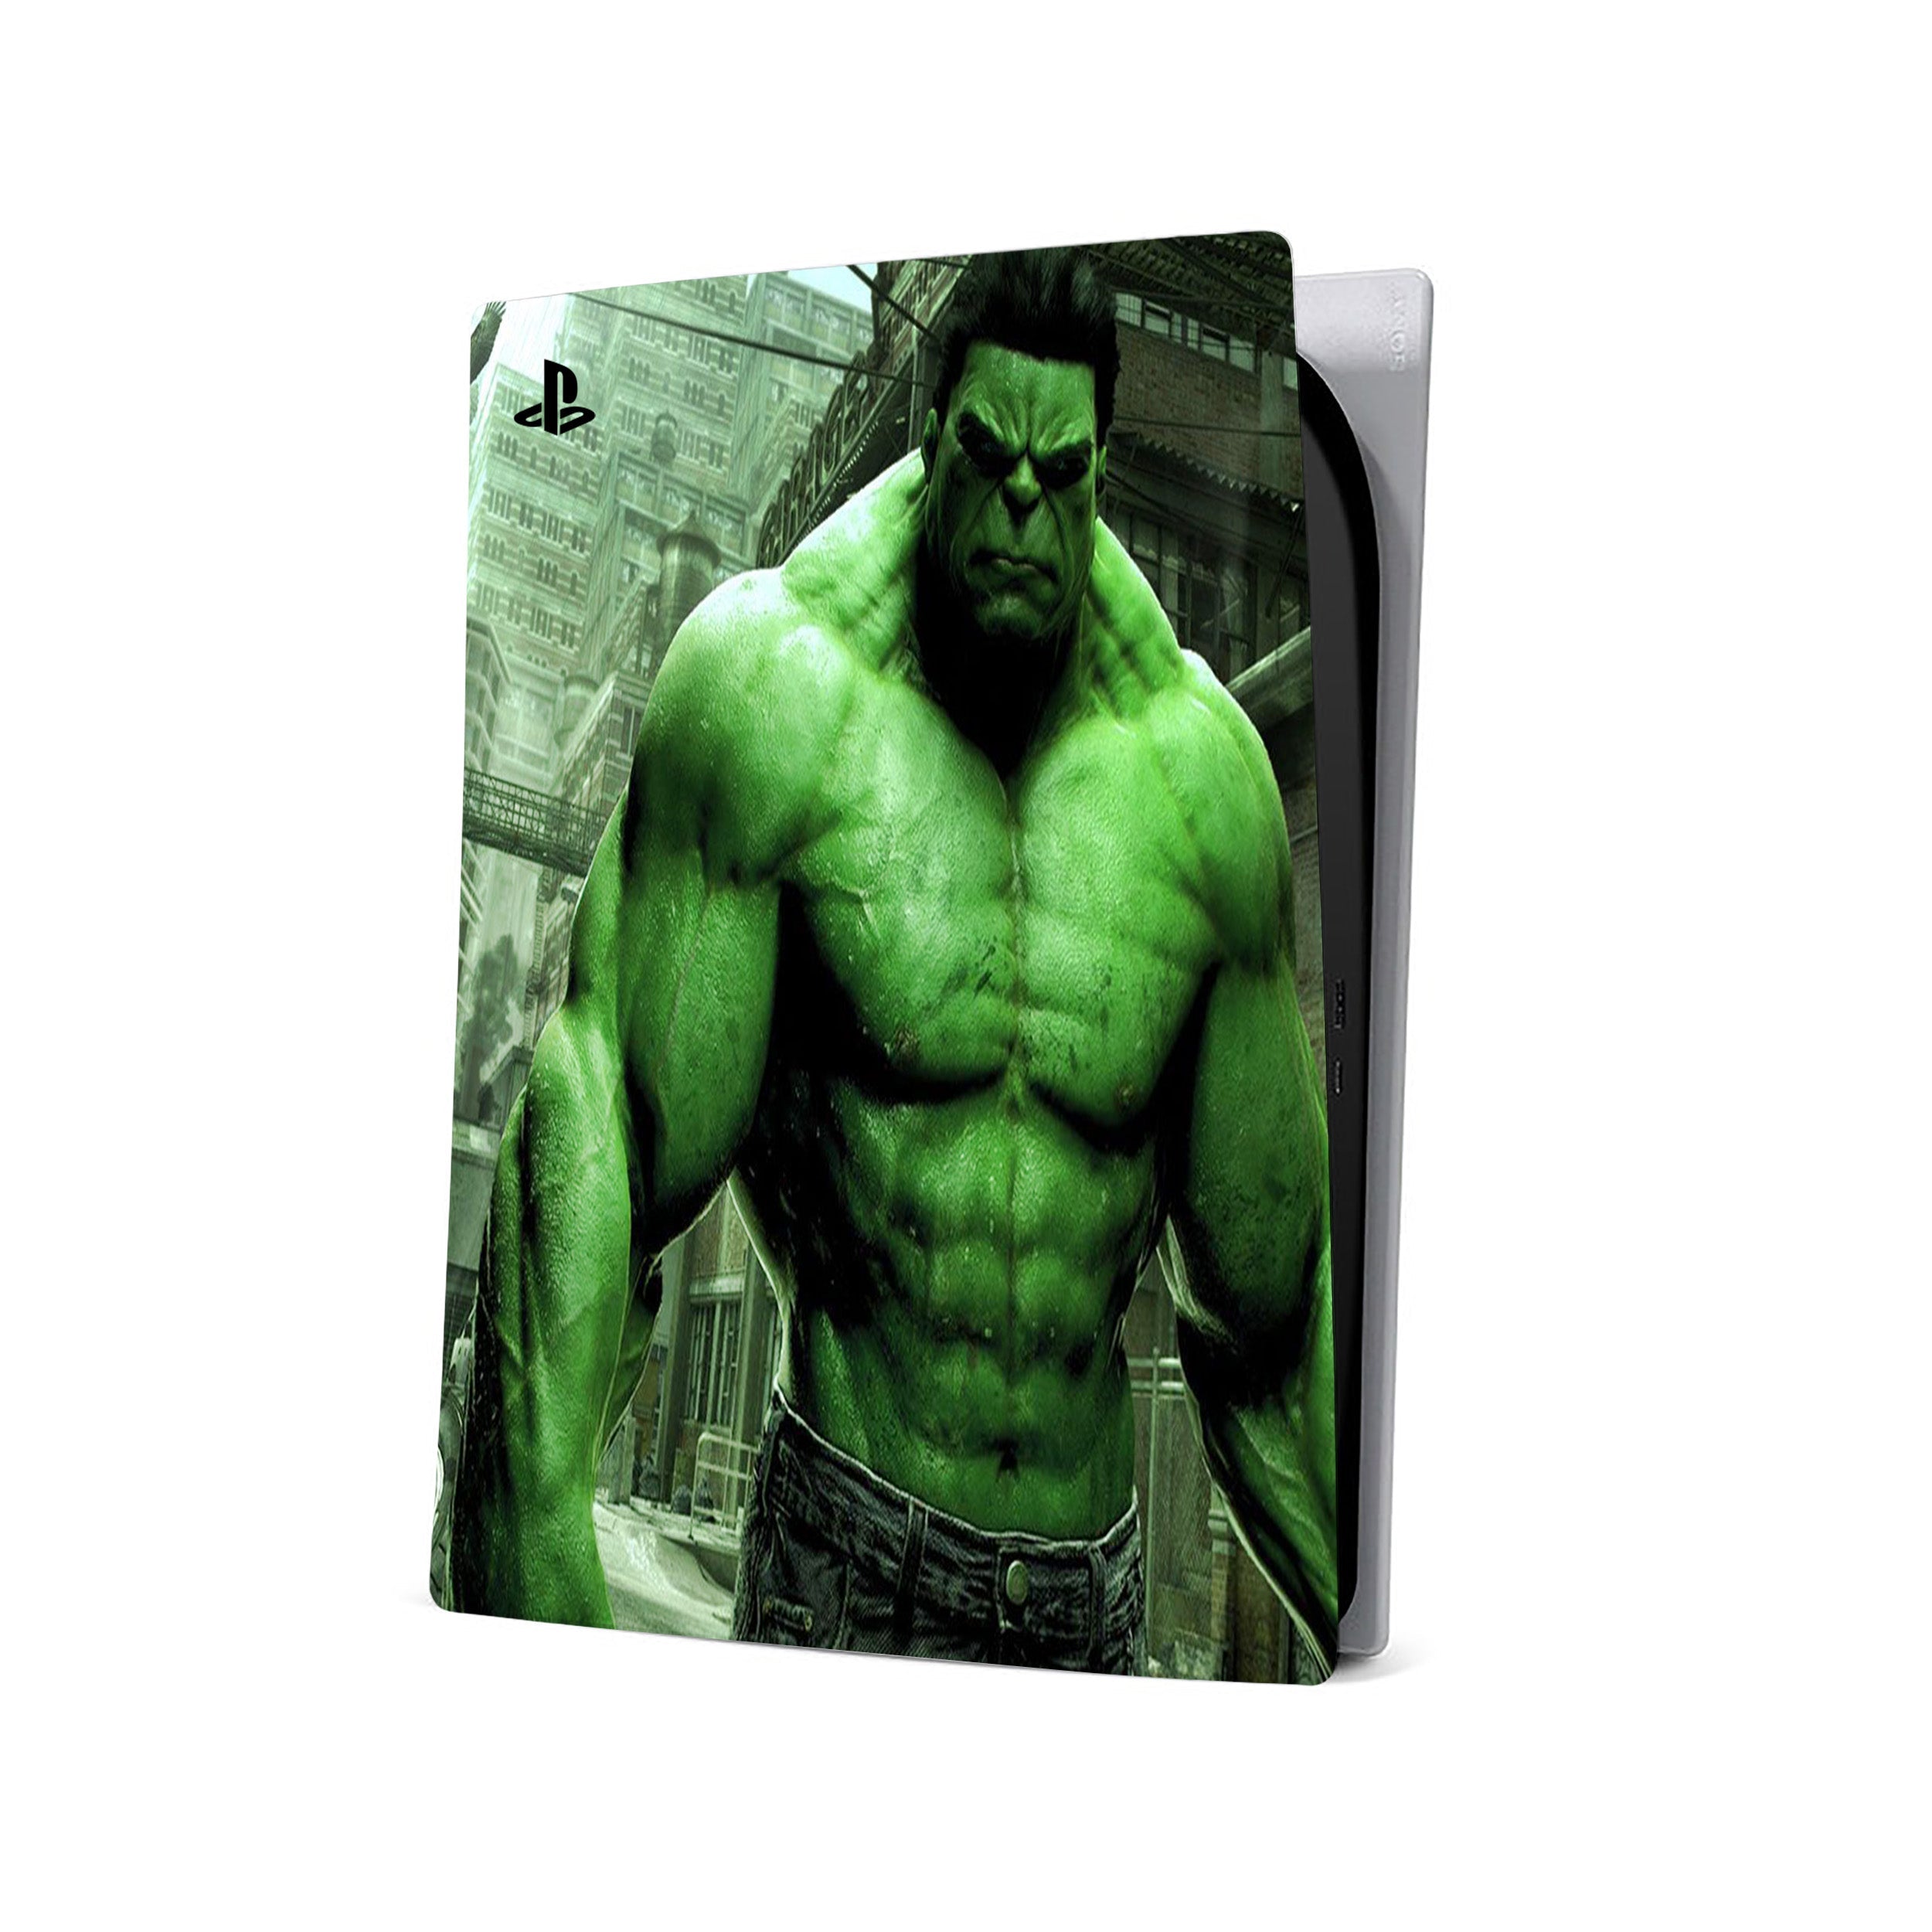 A video game skin featuring a Marvel Hulk design for the PS5.